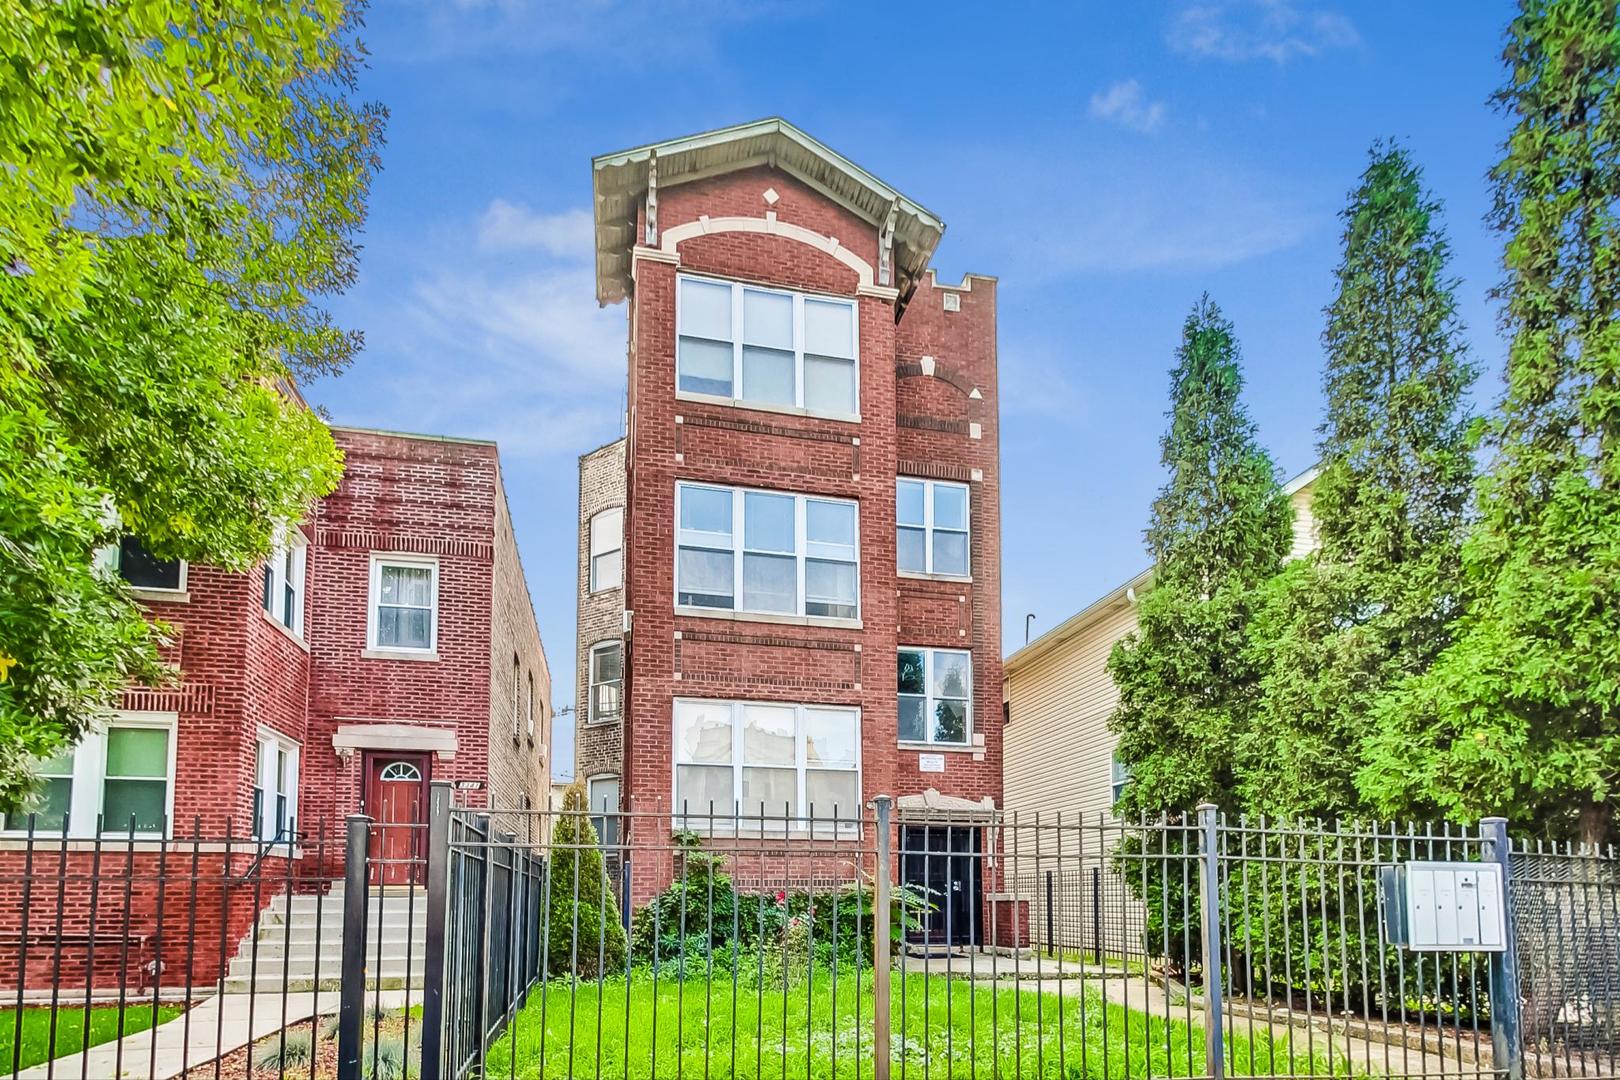 12 Apartment in East Garfield Park